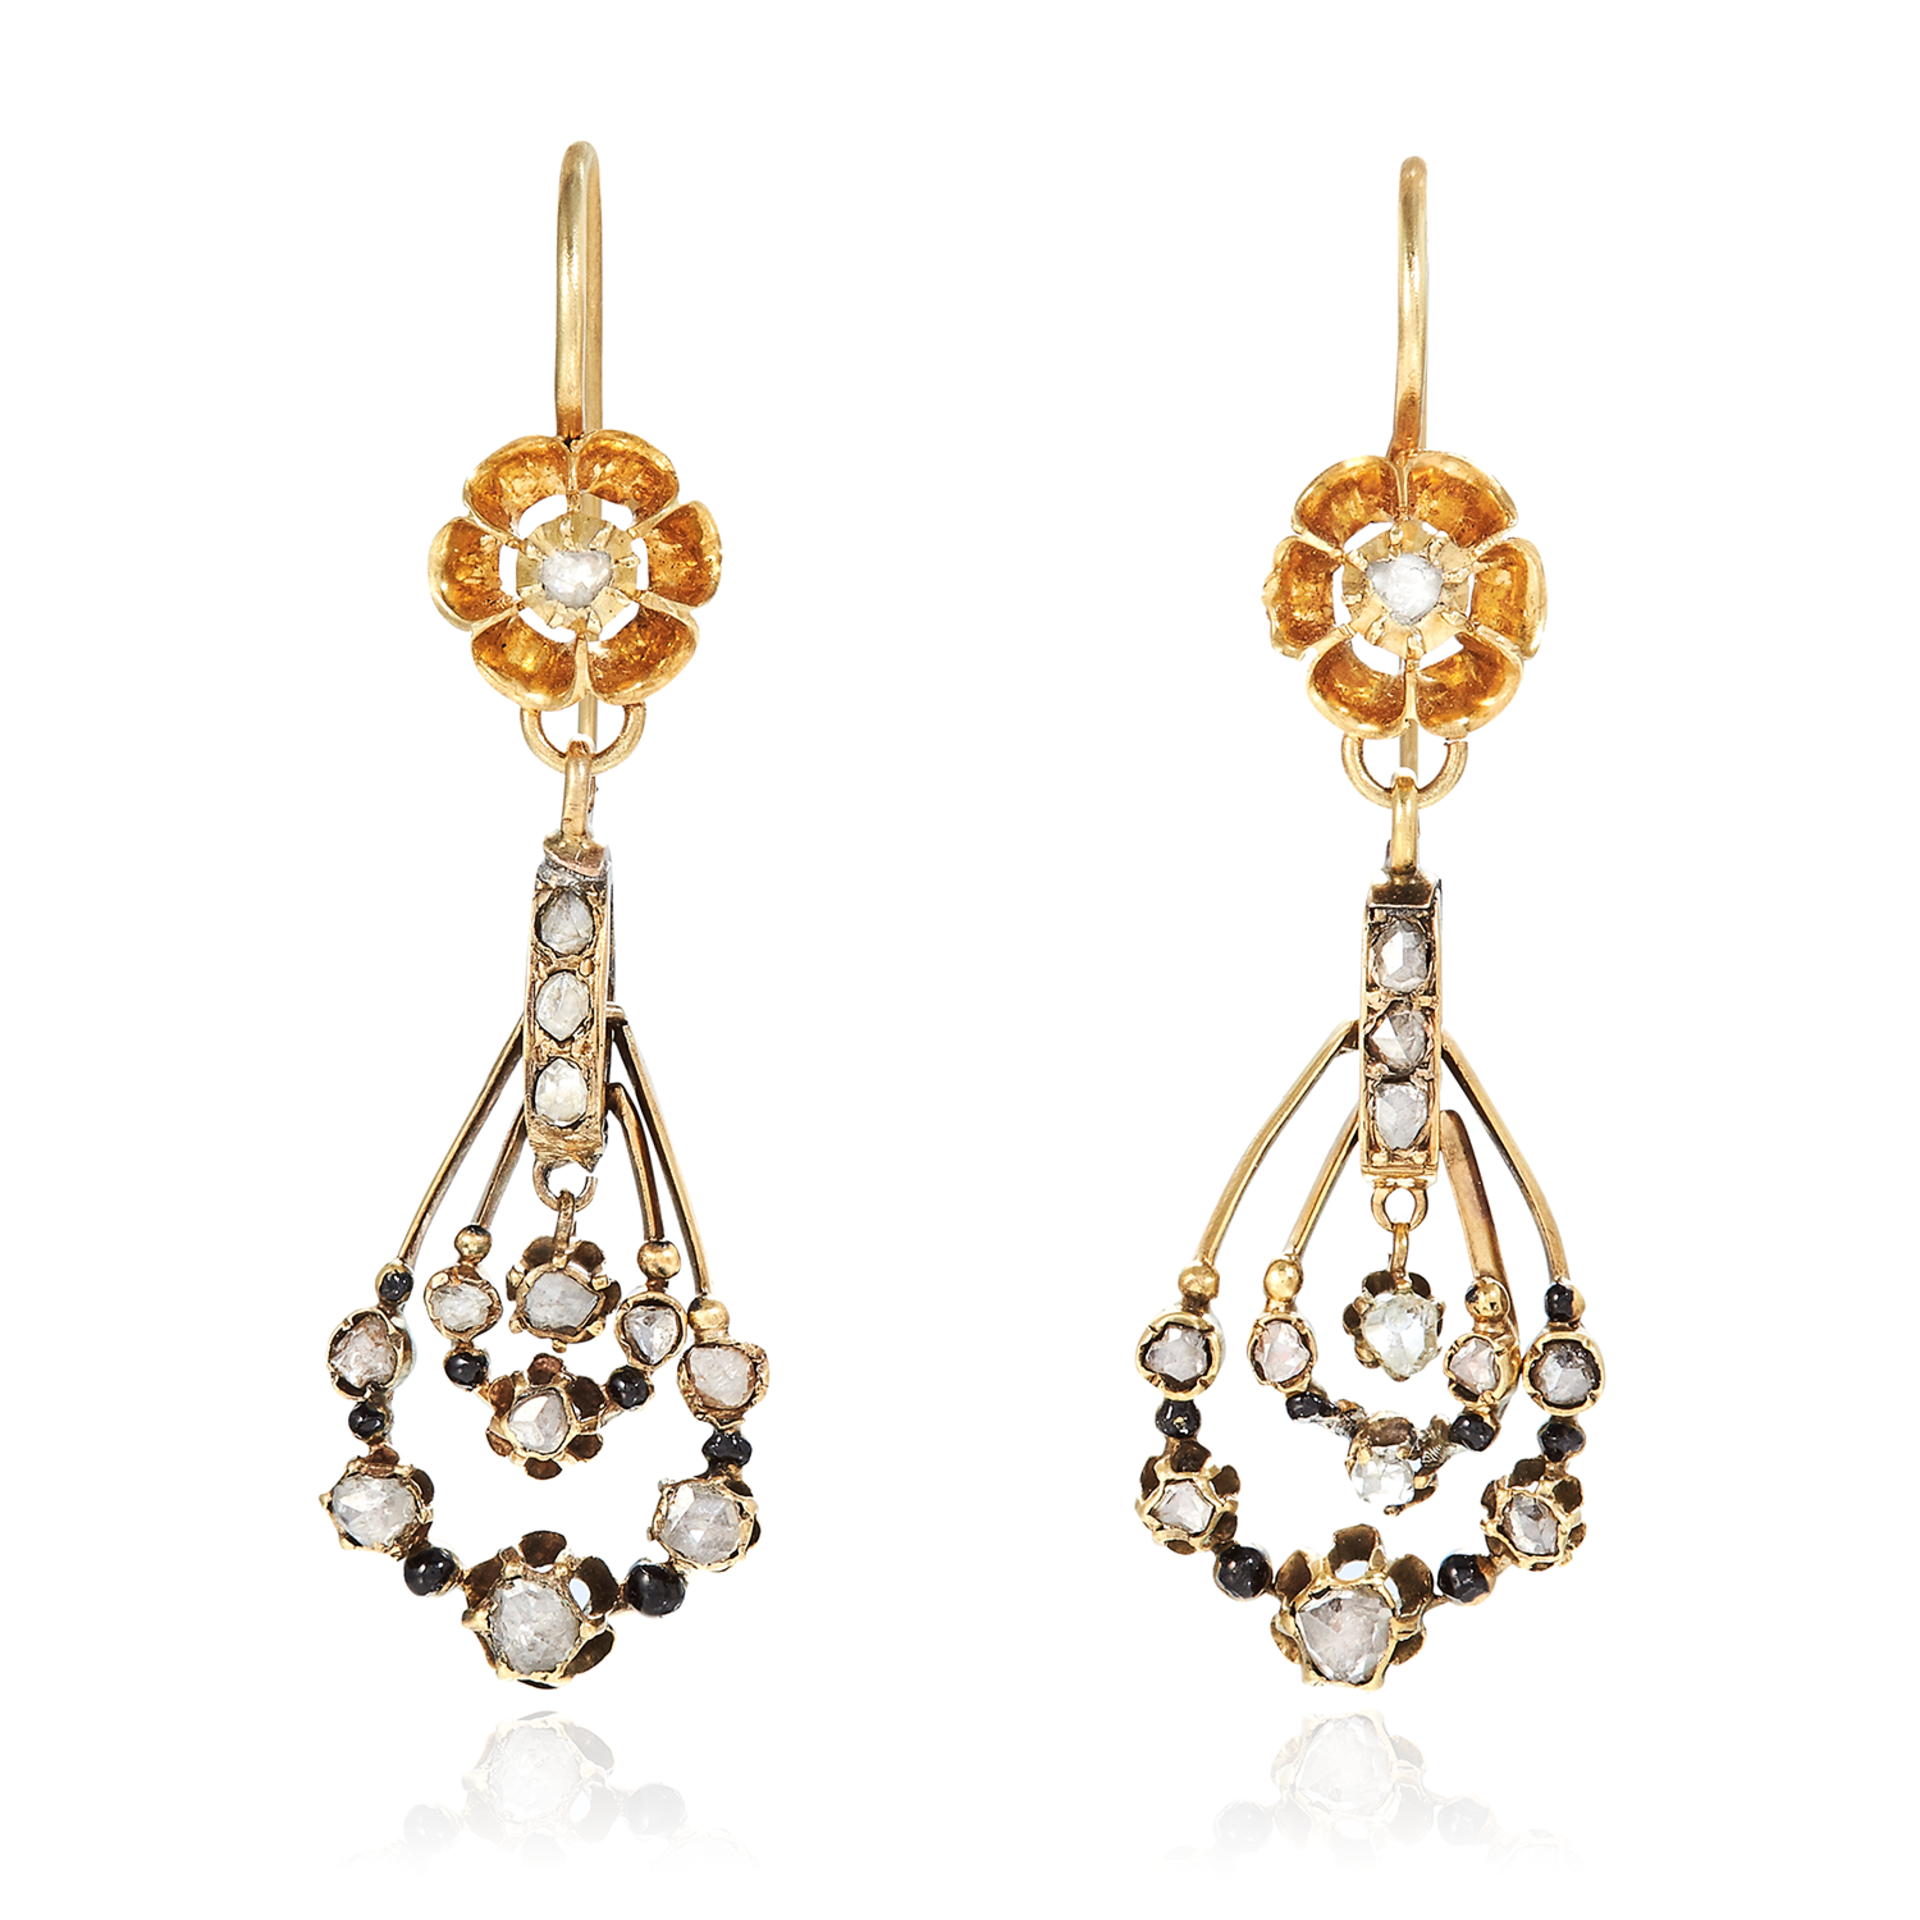 A PAIR OF ANTIQUE DIAMOND EARRINGS in high carat yellow gold, the articulated body of each formed of